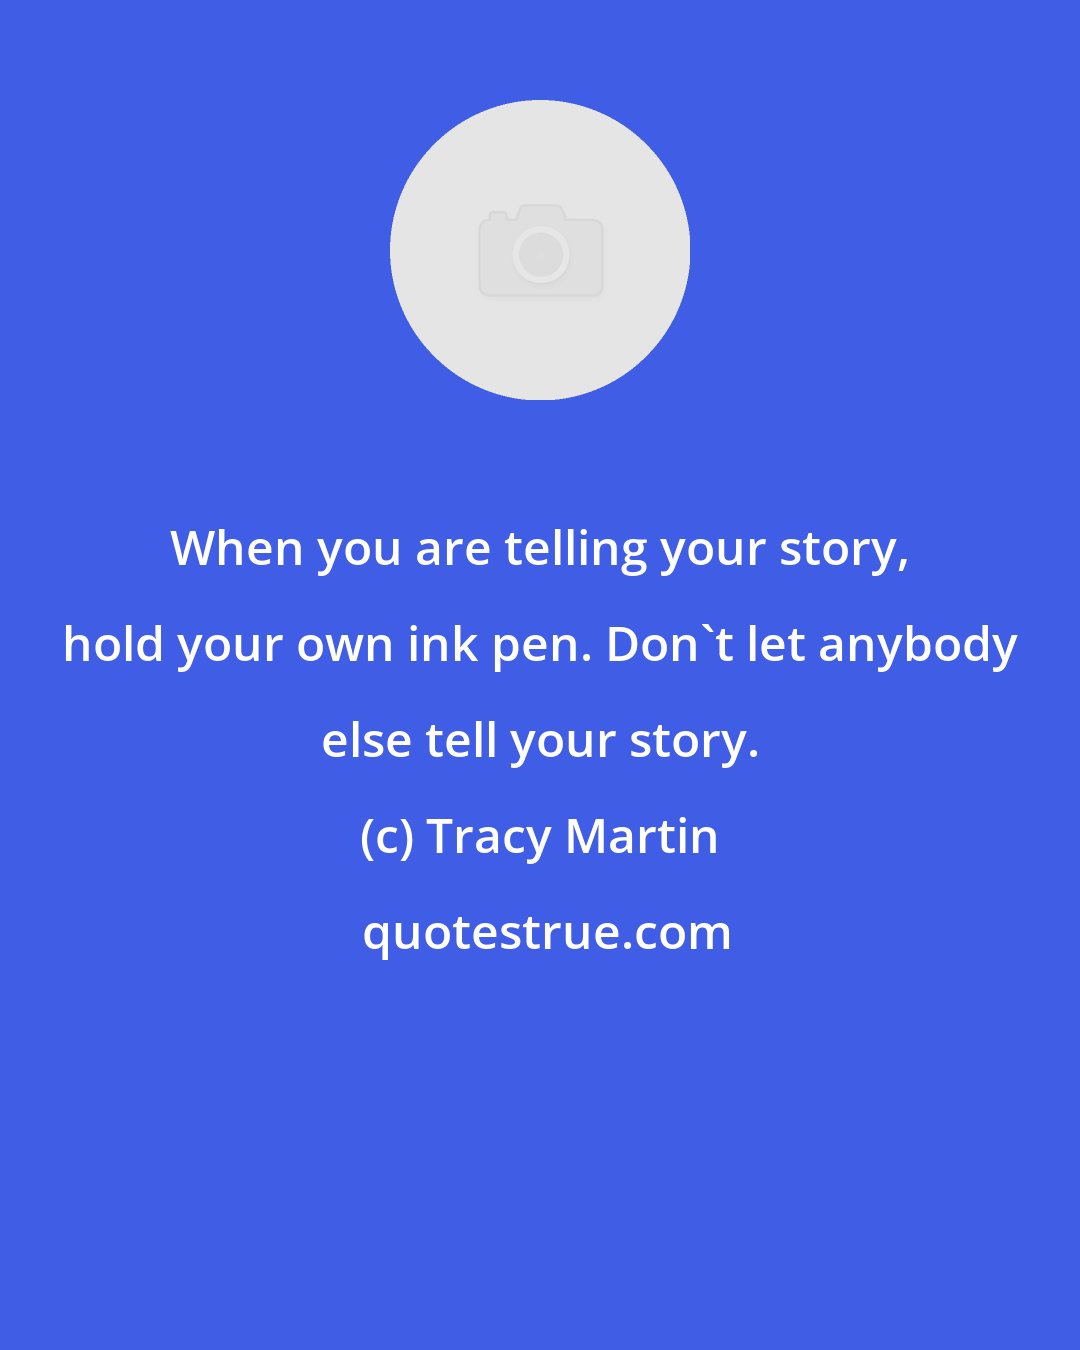 Tracy Martin: When you are telling your story, hold your own ink pen. Don't let anybody else tell your story.